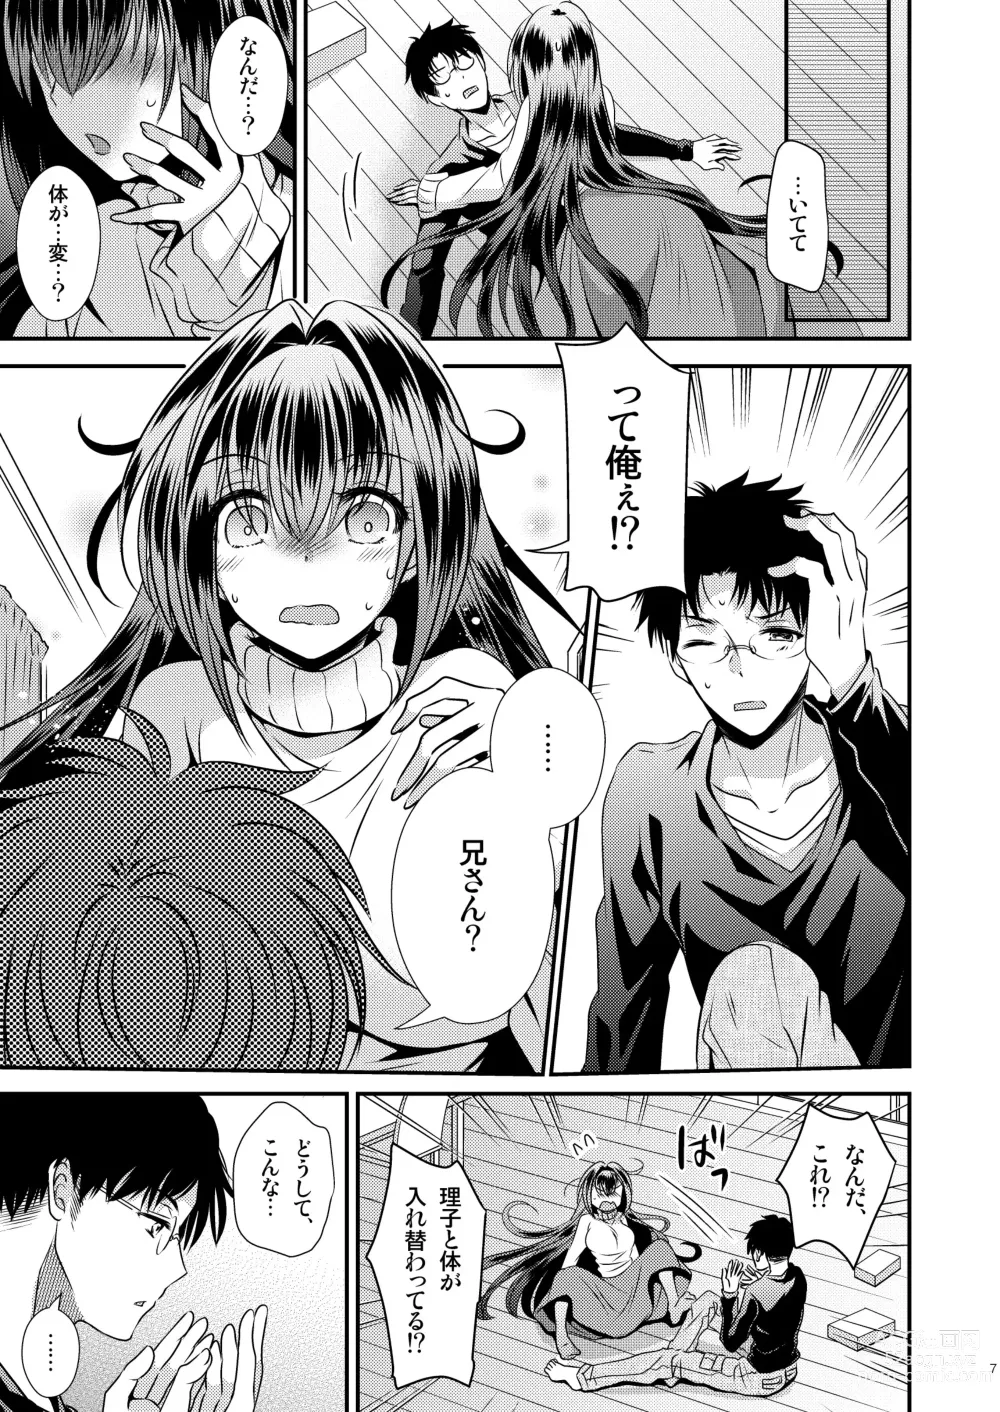 Page 7 of doujinshi 性欲処理に使っていた妹と入れ替わった兄